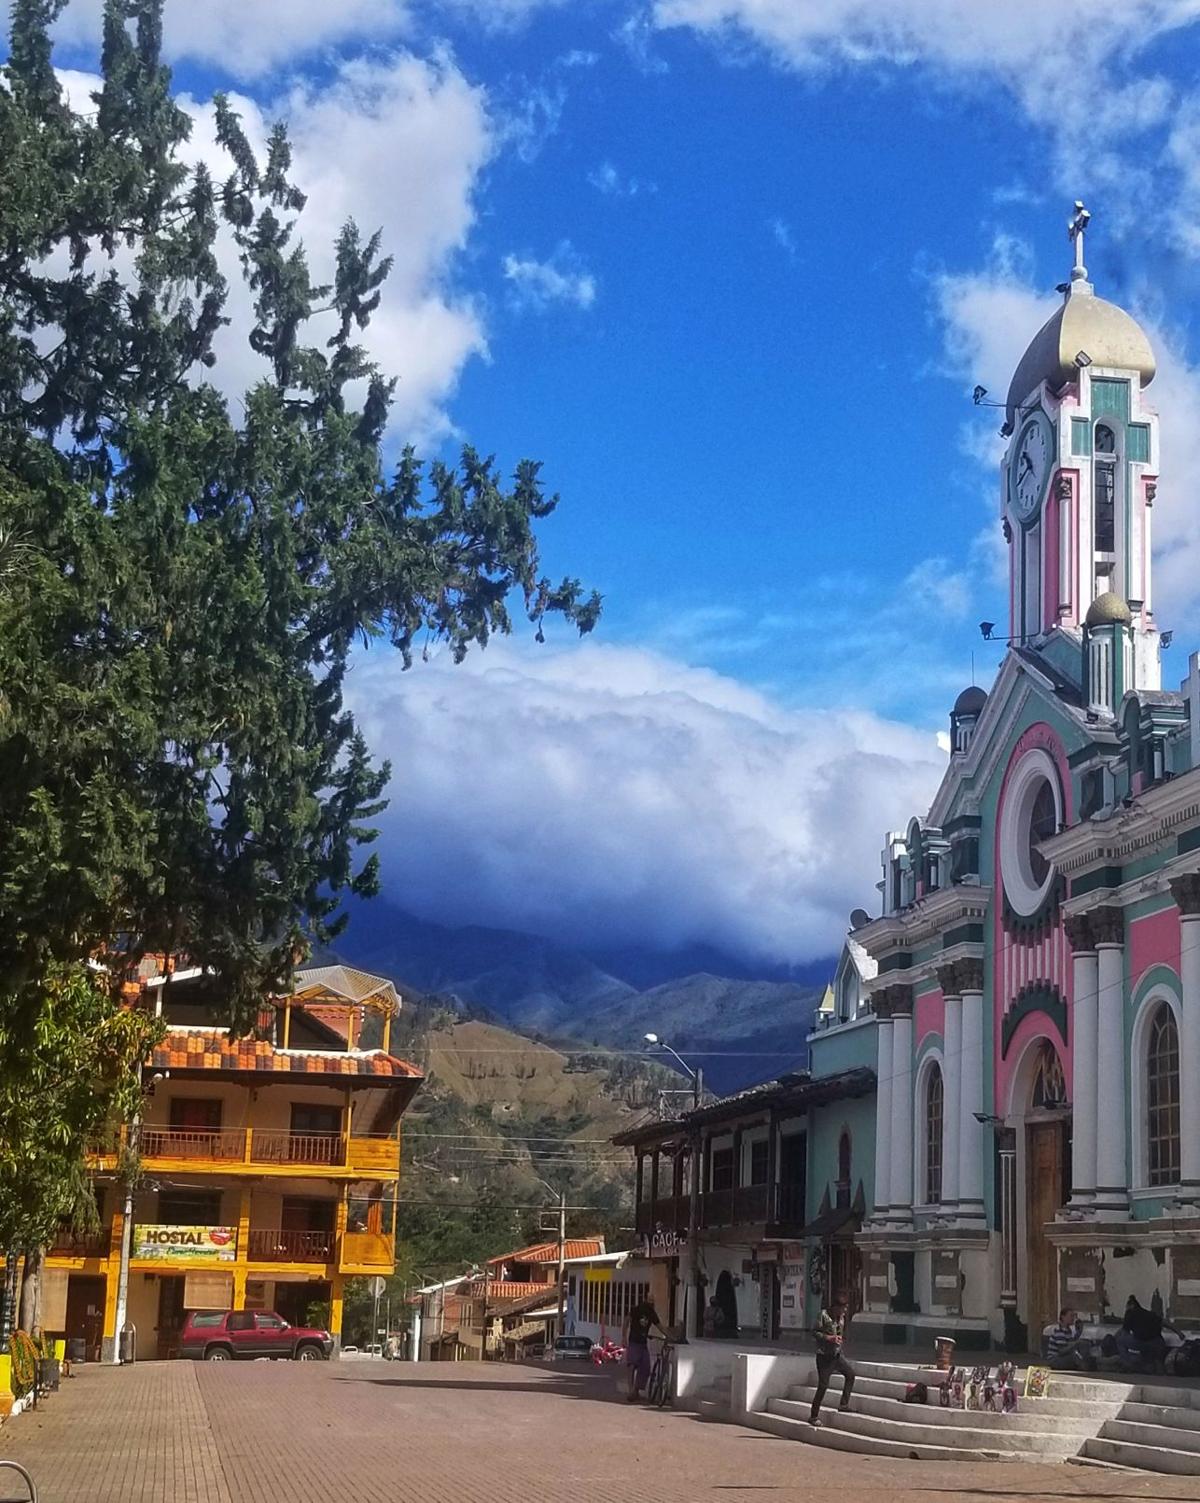 Rogue & Vagabond: A Town in the Andes Mountains | Arts entertainment | fredericknewspost.com